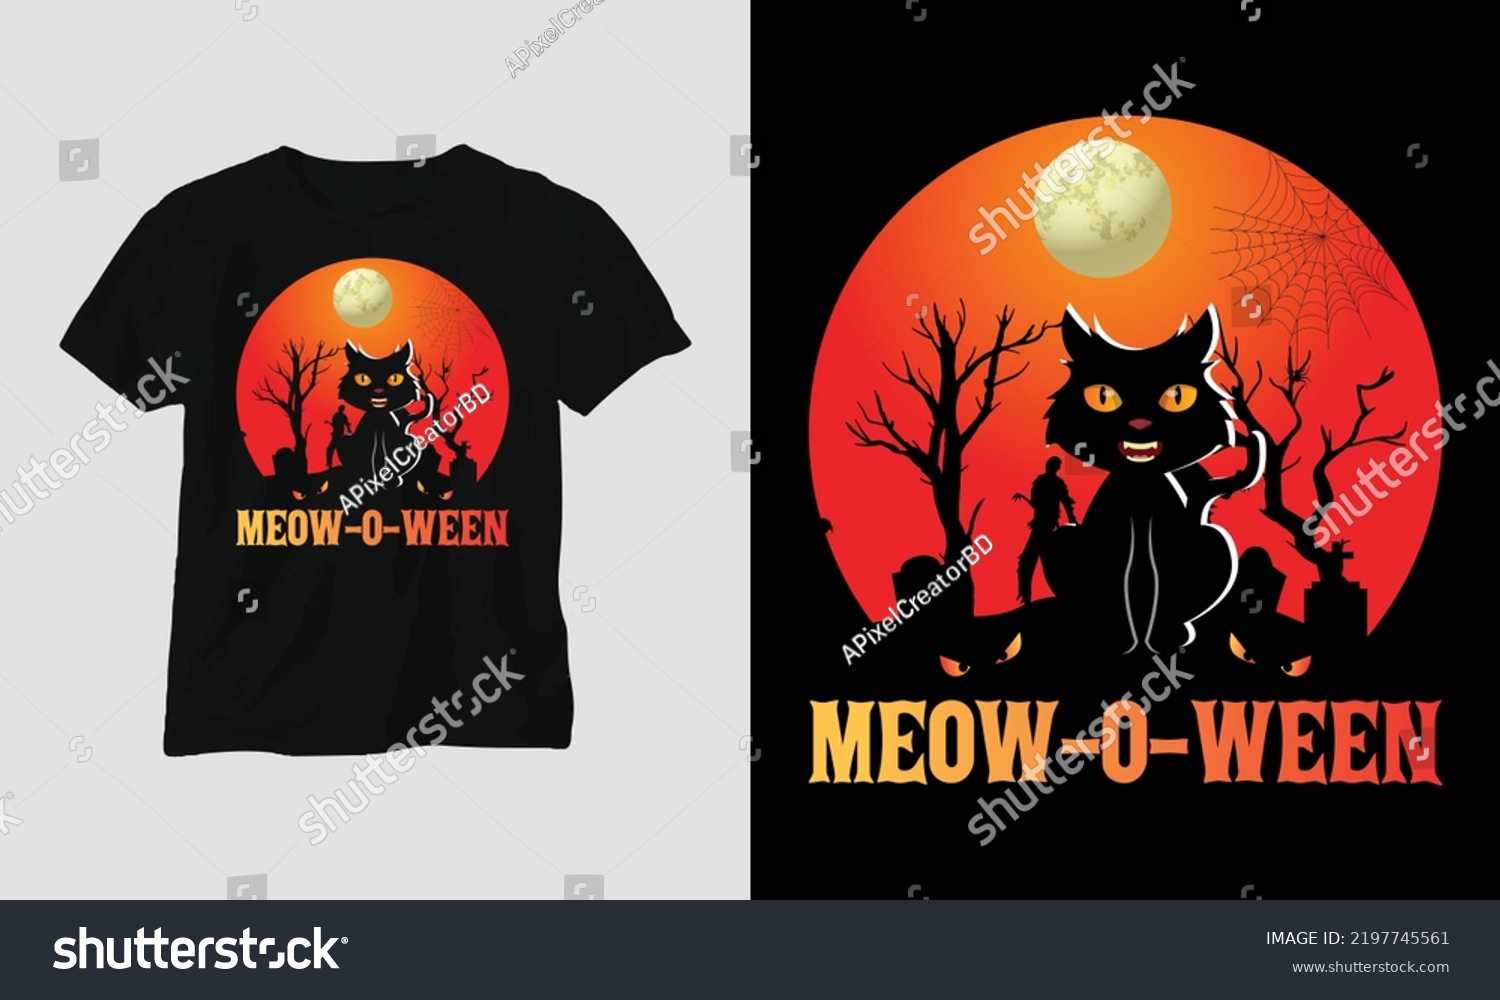 SVG of Halloween Day Special T-shirt Design with “meow-o-ween” Quotes, Best use for T-Shirt, mag, sticker, wall mat, etc. svg